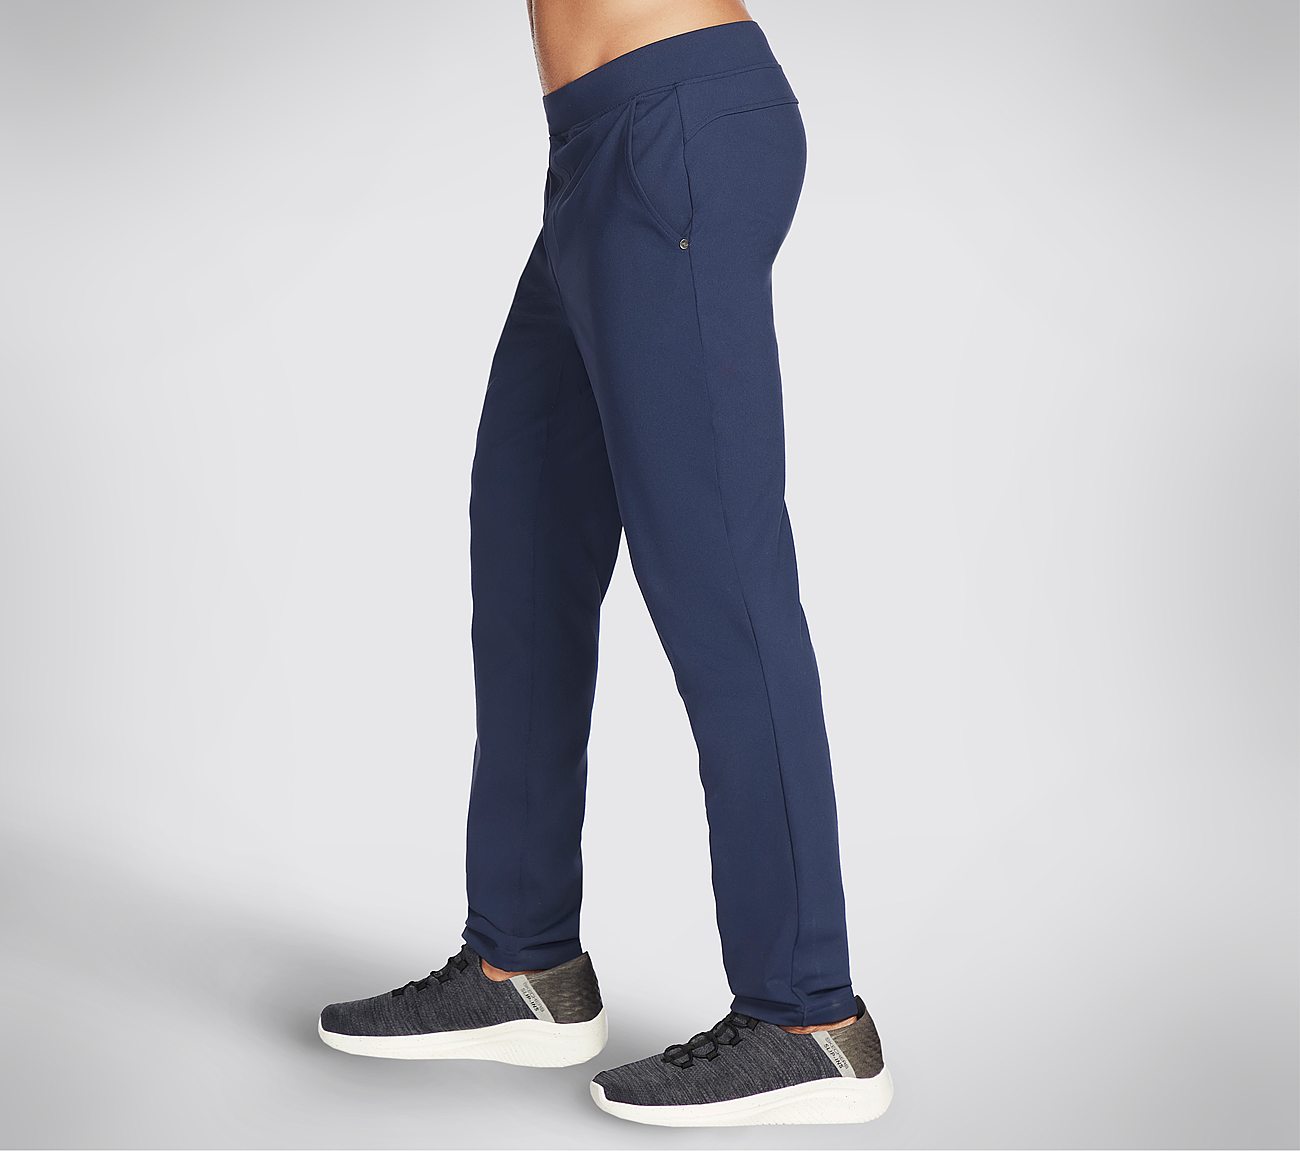 THE GOWALK PANT CONTROLLER, NNNAVY Apparels Left View